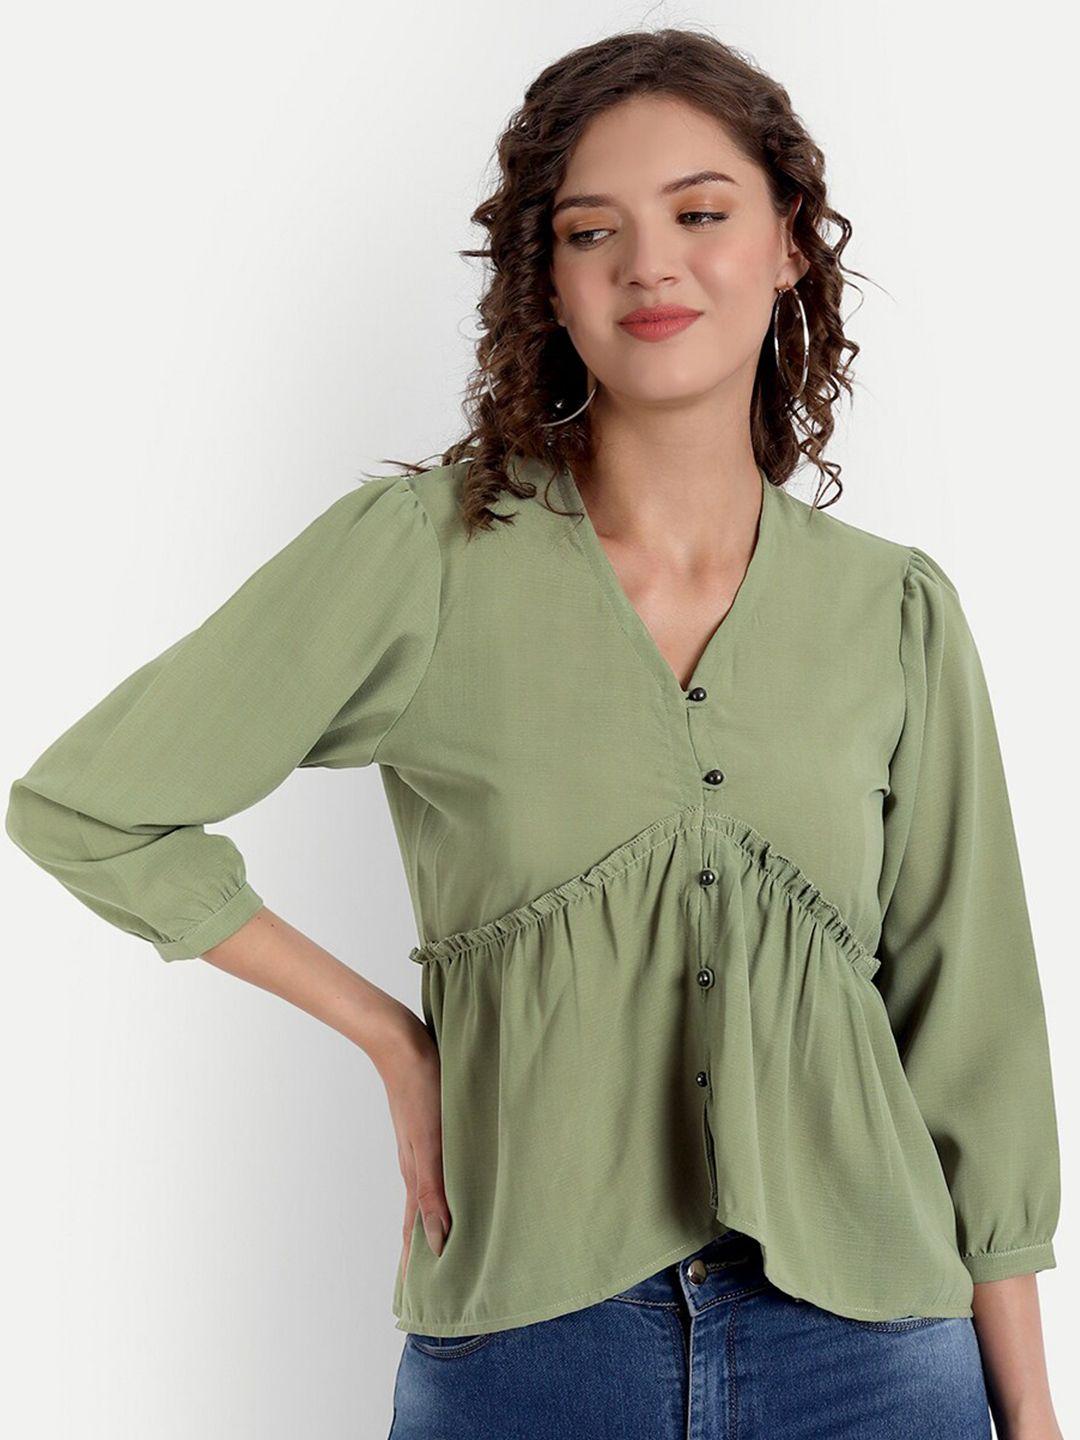 parassio clothings women olive green georgette top